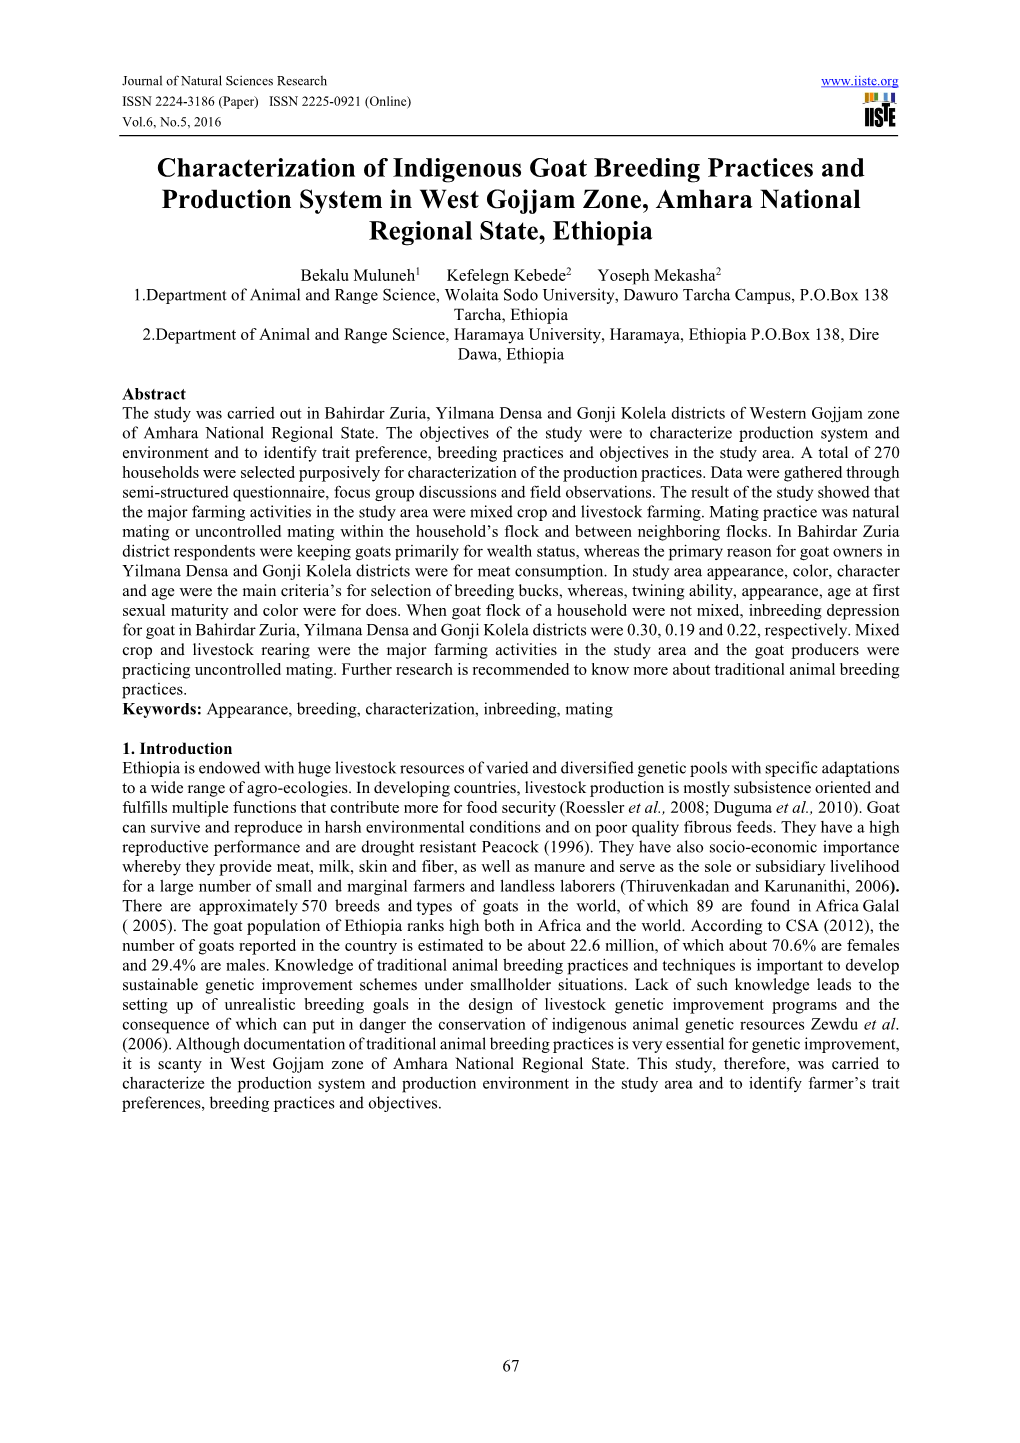 Characterization of Indigenous Goat Breeding Practices and Production System in West Gojjam Zone, Amhara National Regional State, Ethiopia